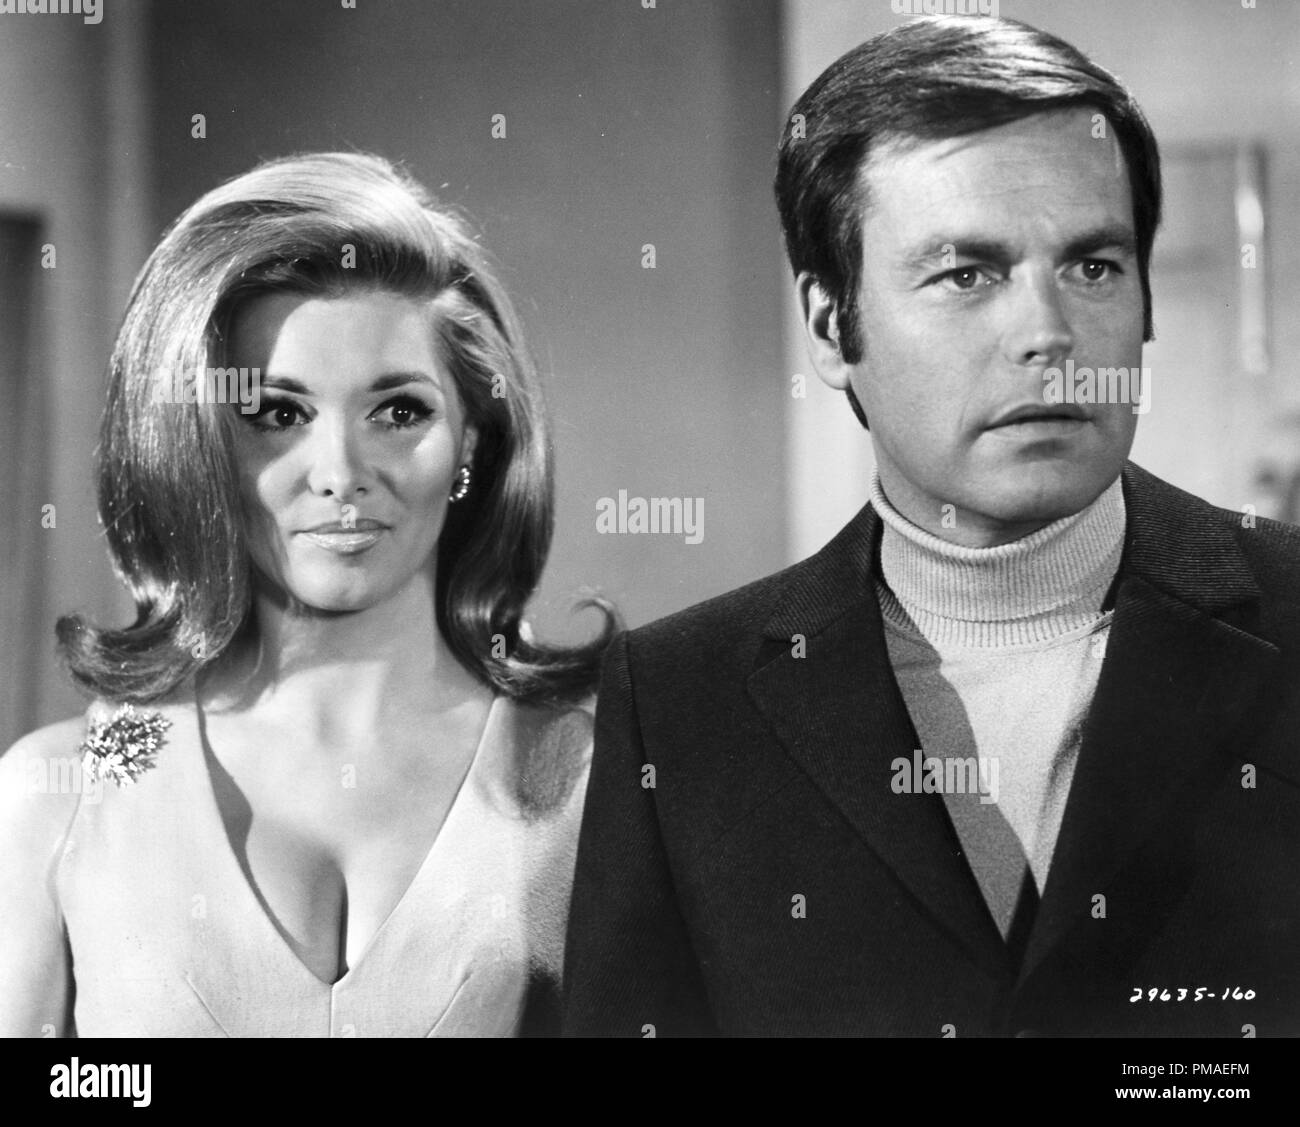 Robert Wagner, "It Takes A Thief", circa 1968 Universal Television/ABC File  Reference # 32509 871THA Stock Photo - Alamy